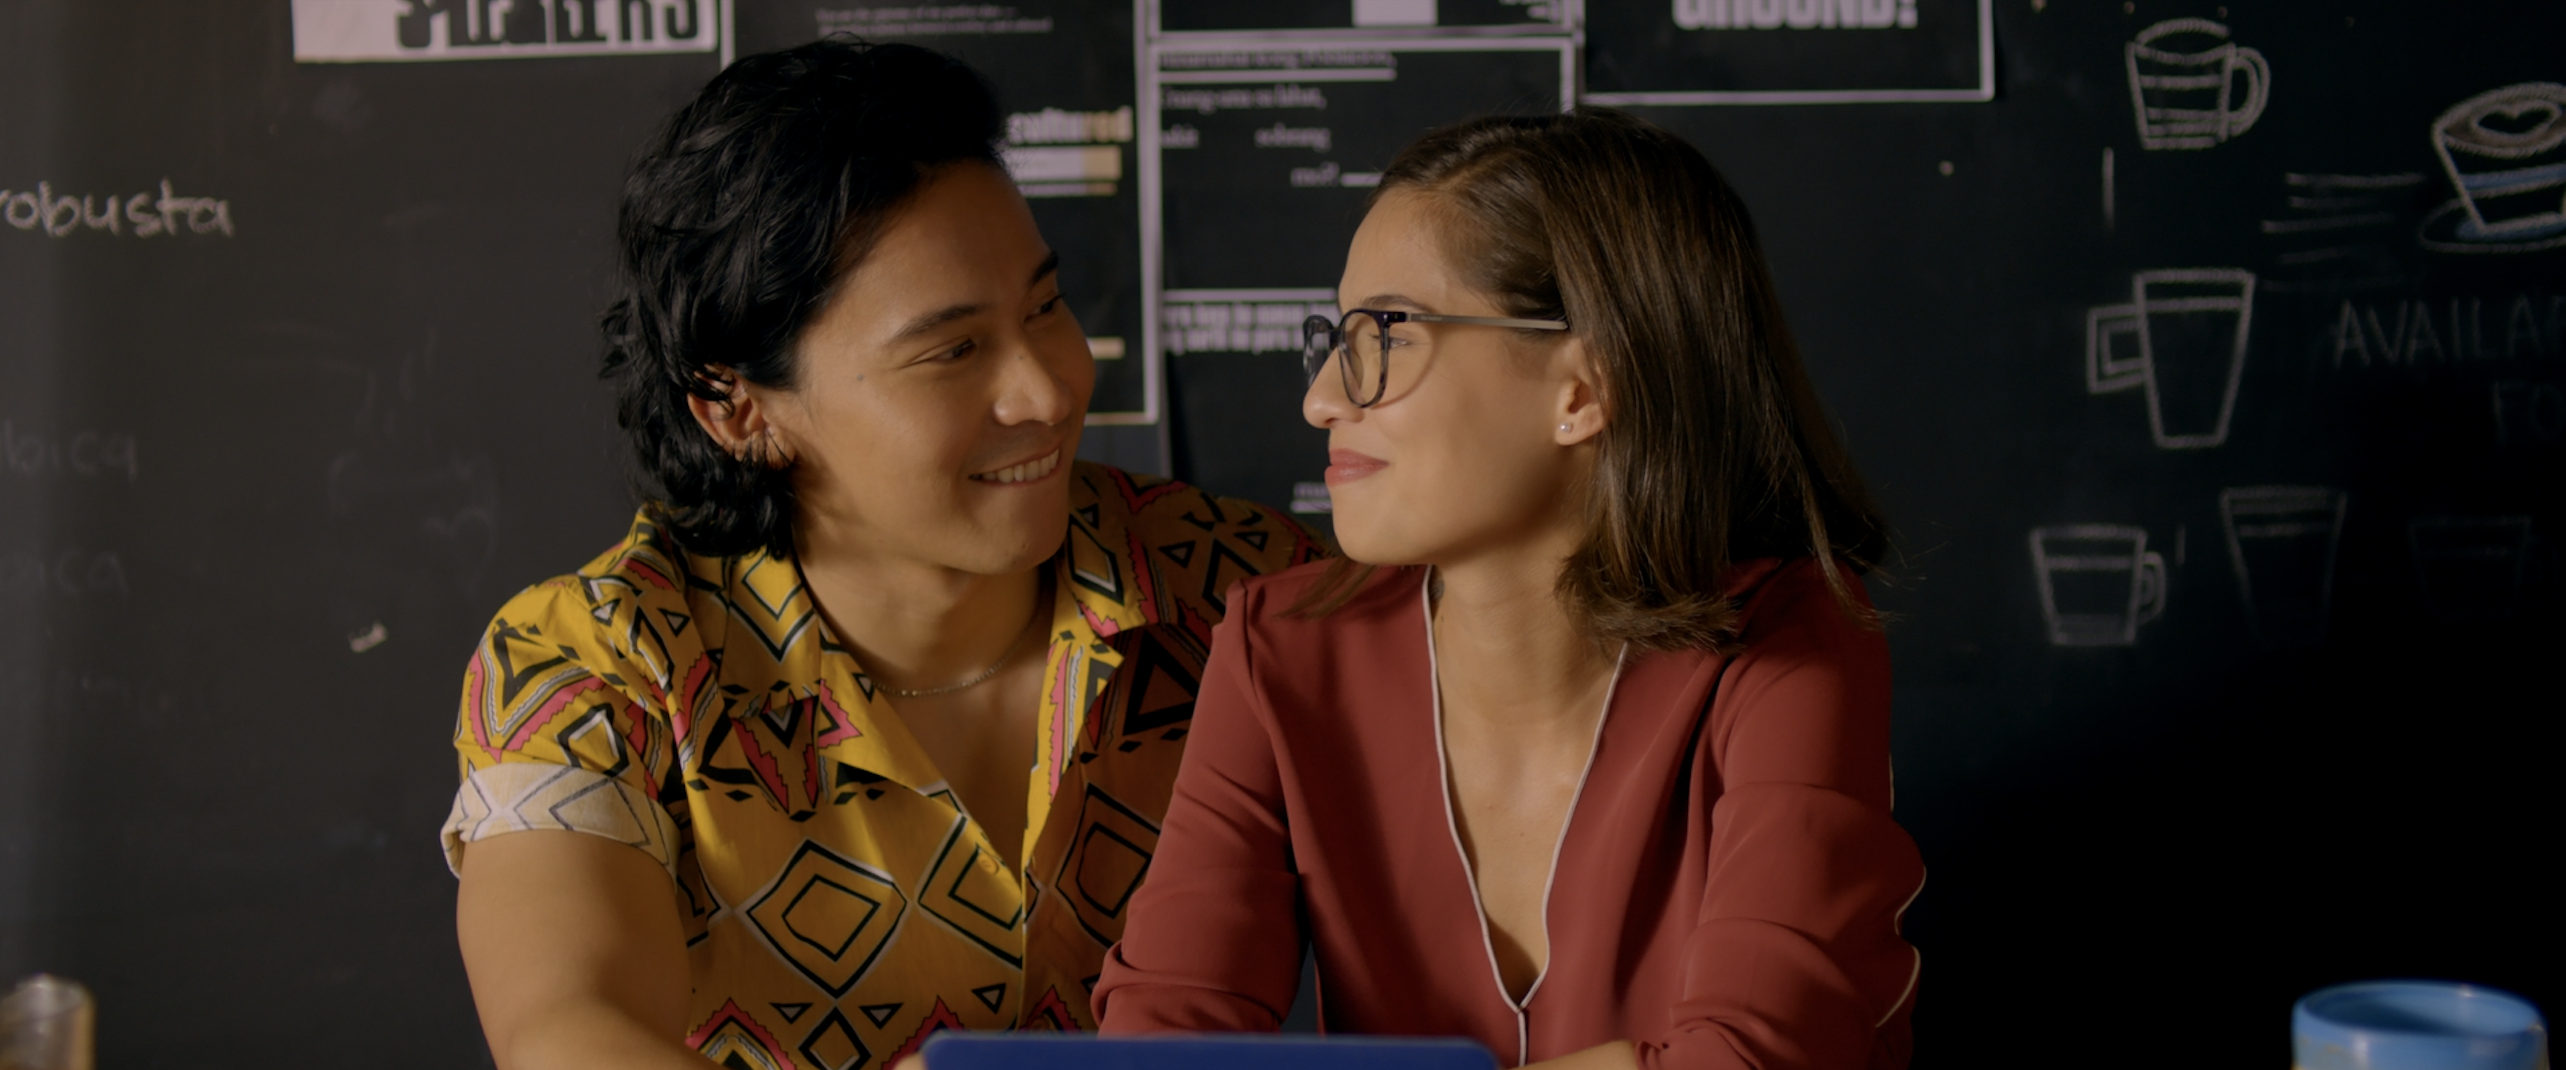 SAVE THE DATE: ALTER ME starring Jasmine Curtis-Smith and Enchong Dee premieres on Netflix on November 15, 2020